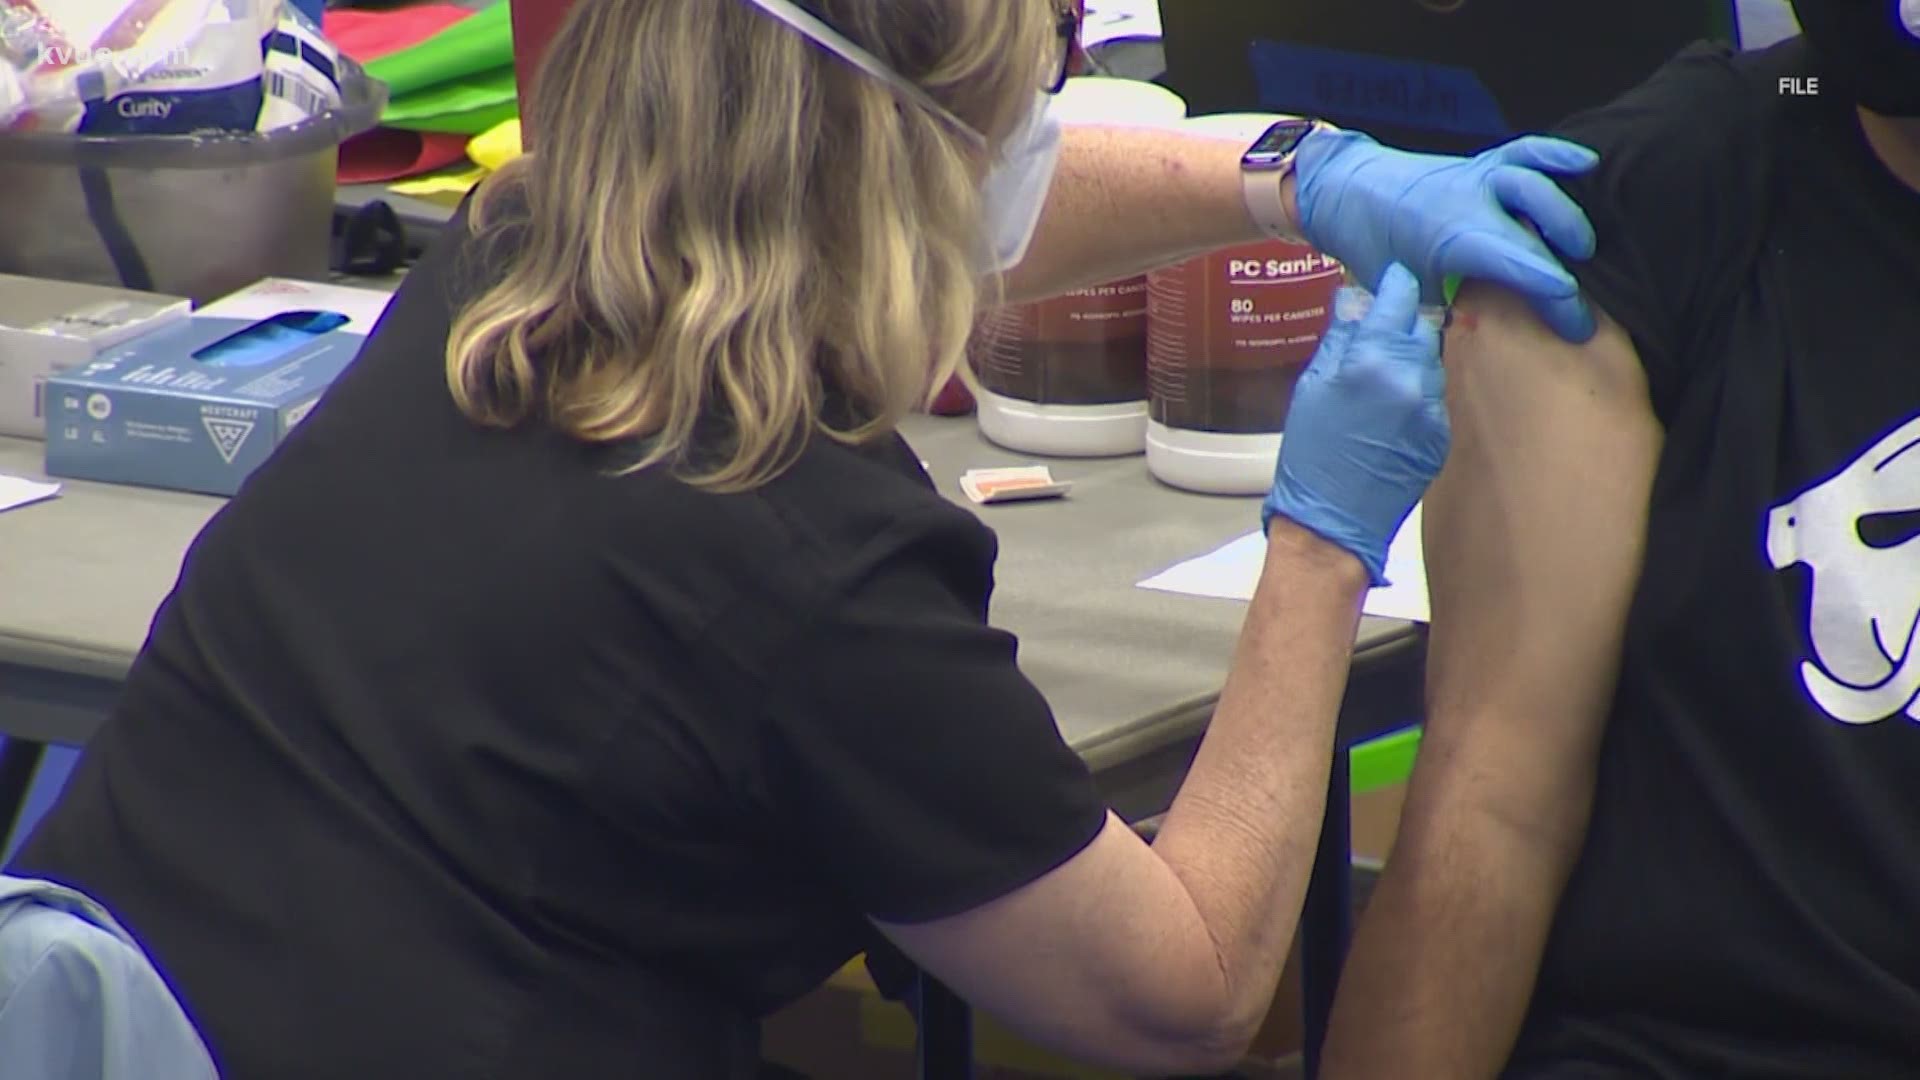 Starting on March 29, all Texas adults will be eligible for COVID-19 vaccines. But that doesn't mean everyone will actually be able to get shots right away.